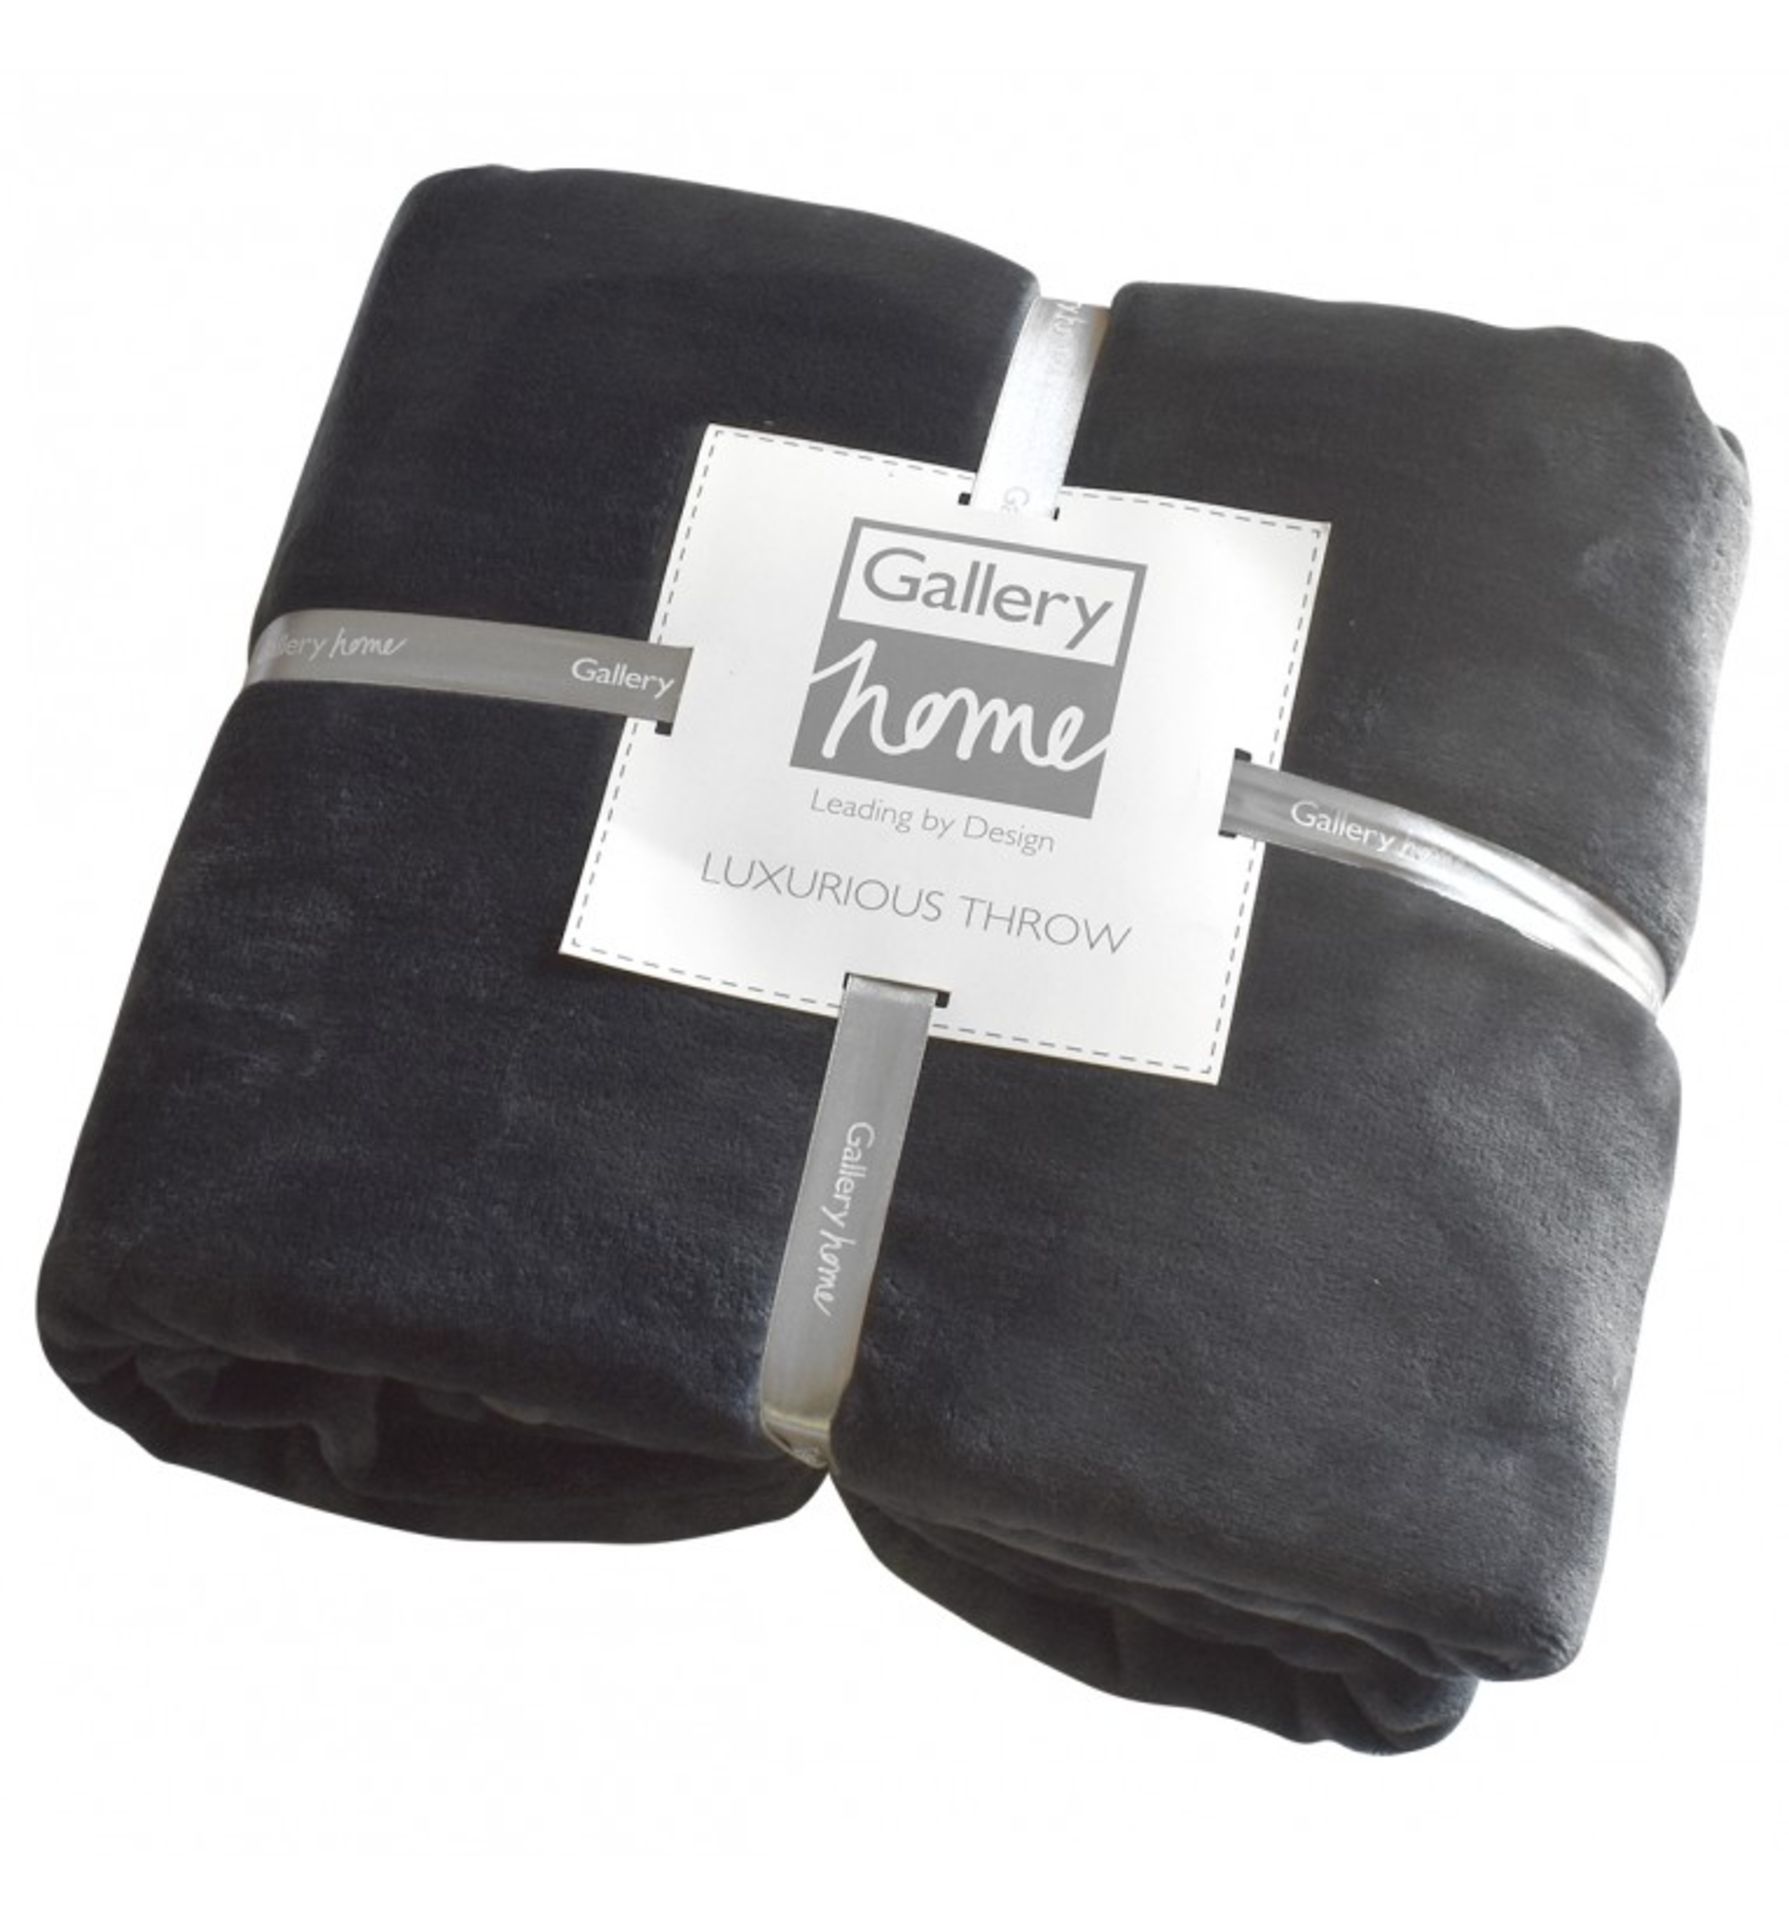 Flannel Fleece Throw Charcoal Kilburn and Scott Super soft flannel fleece throw fits perfectly as an - Image 2 of 2